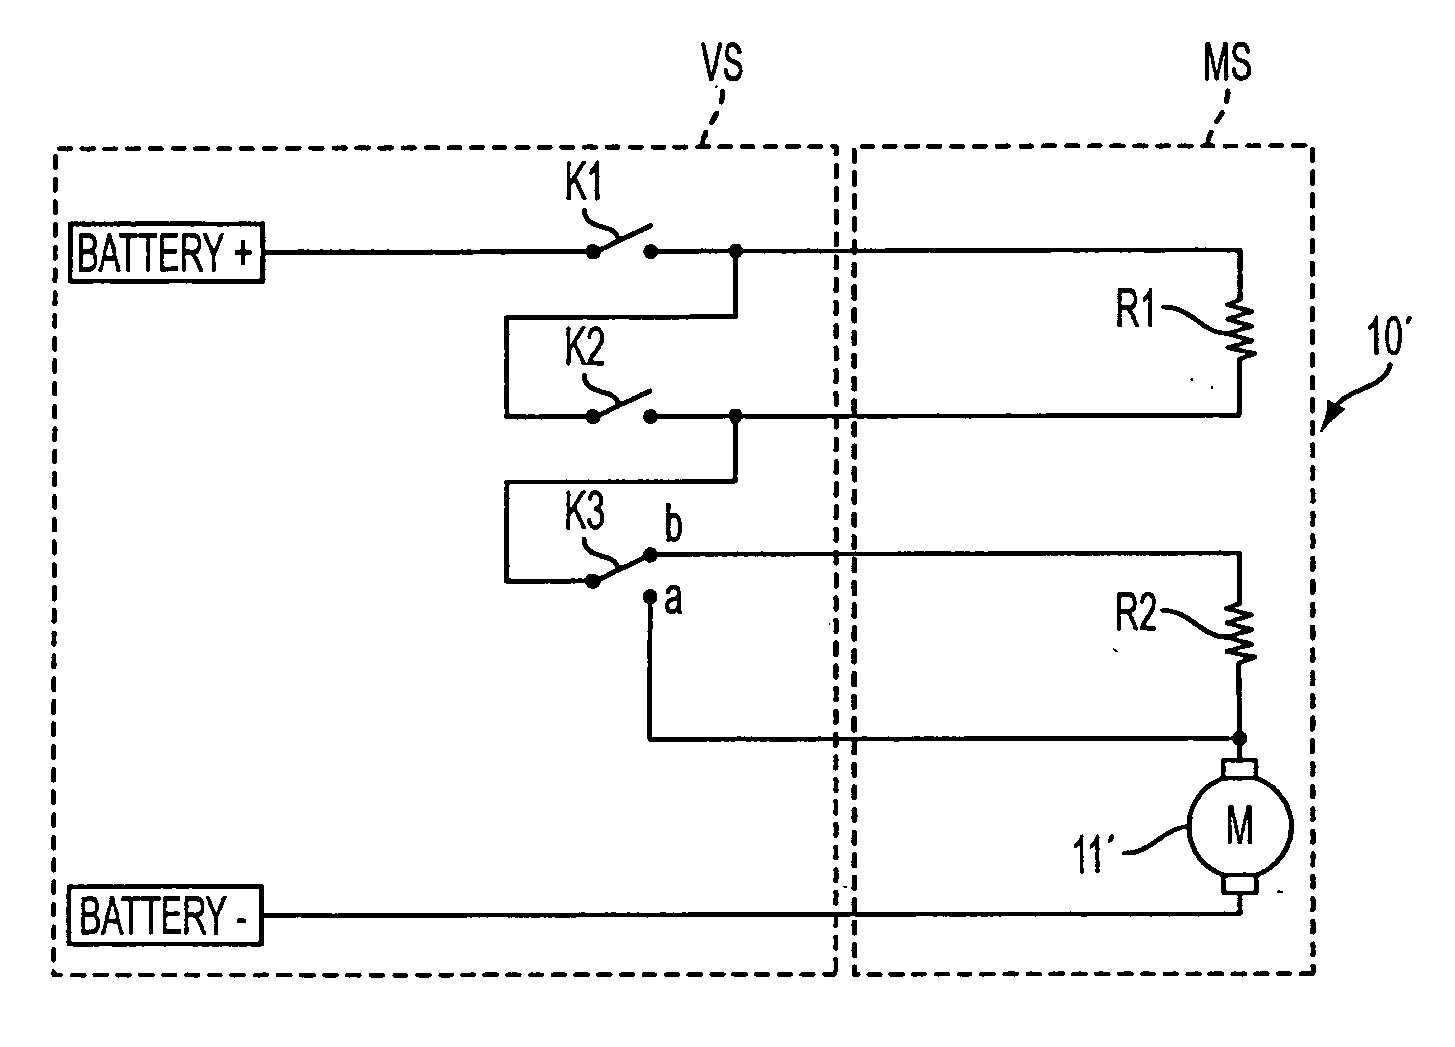 Multi-speed motor system combining at least a one speed electric motor, series resistor and power switches